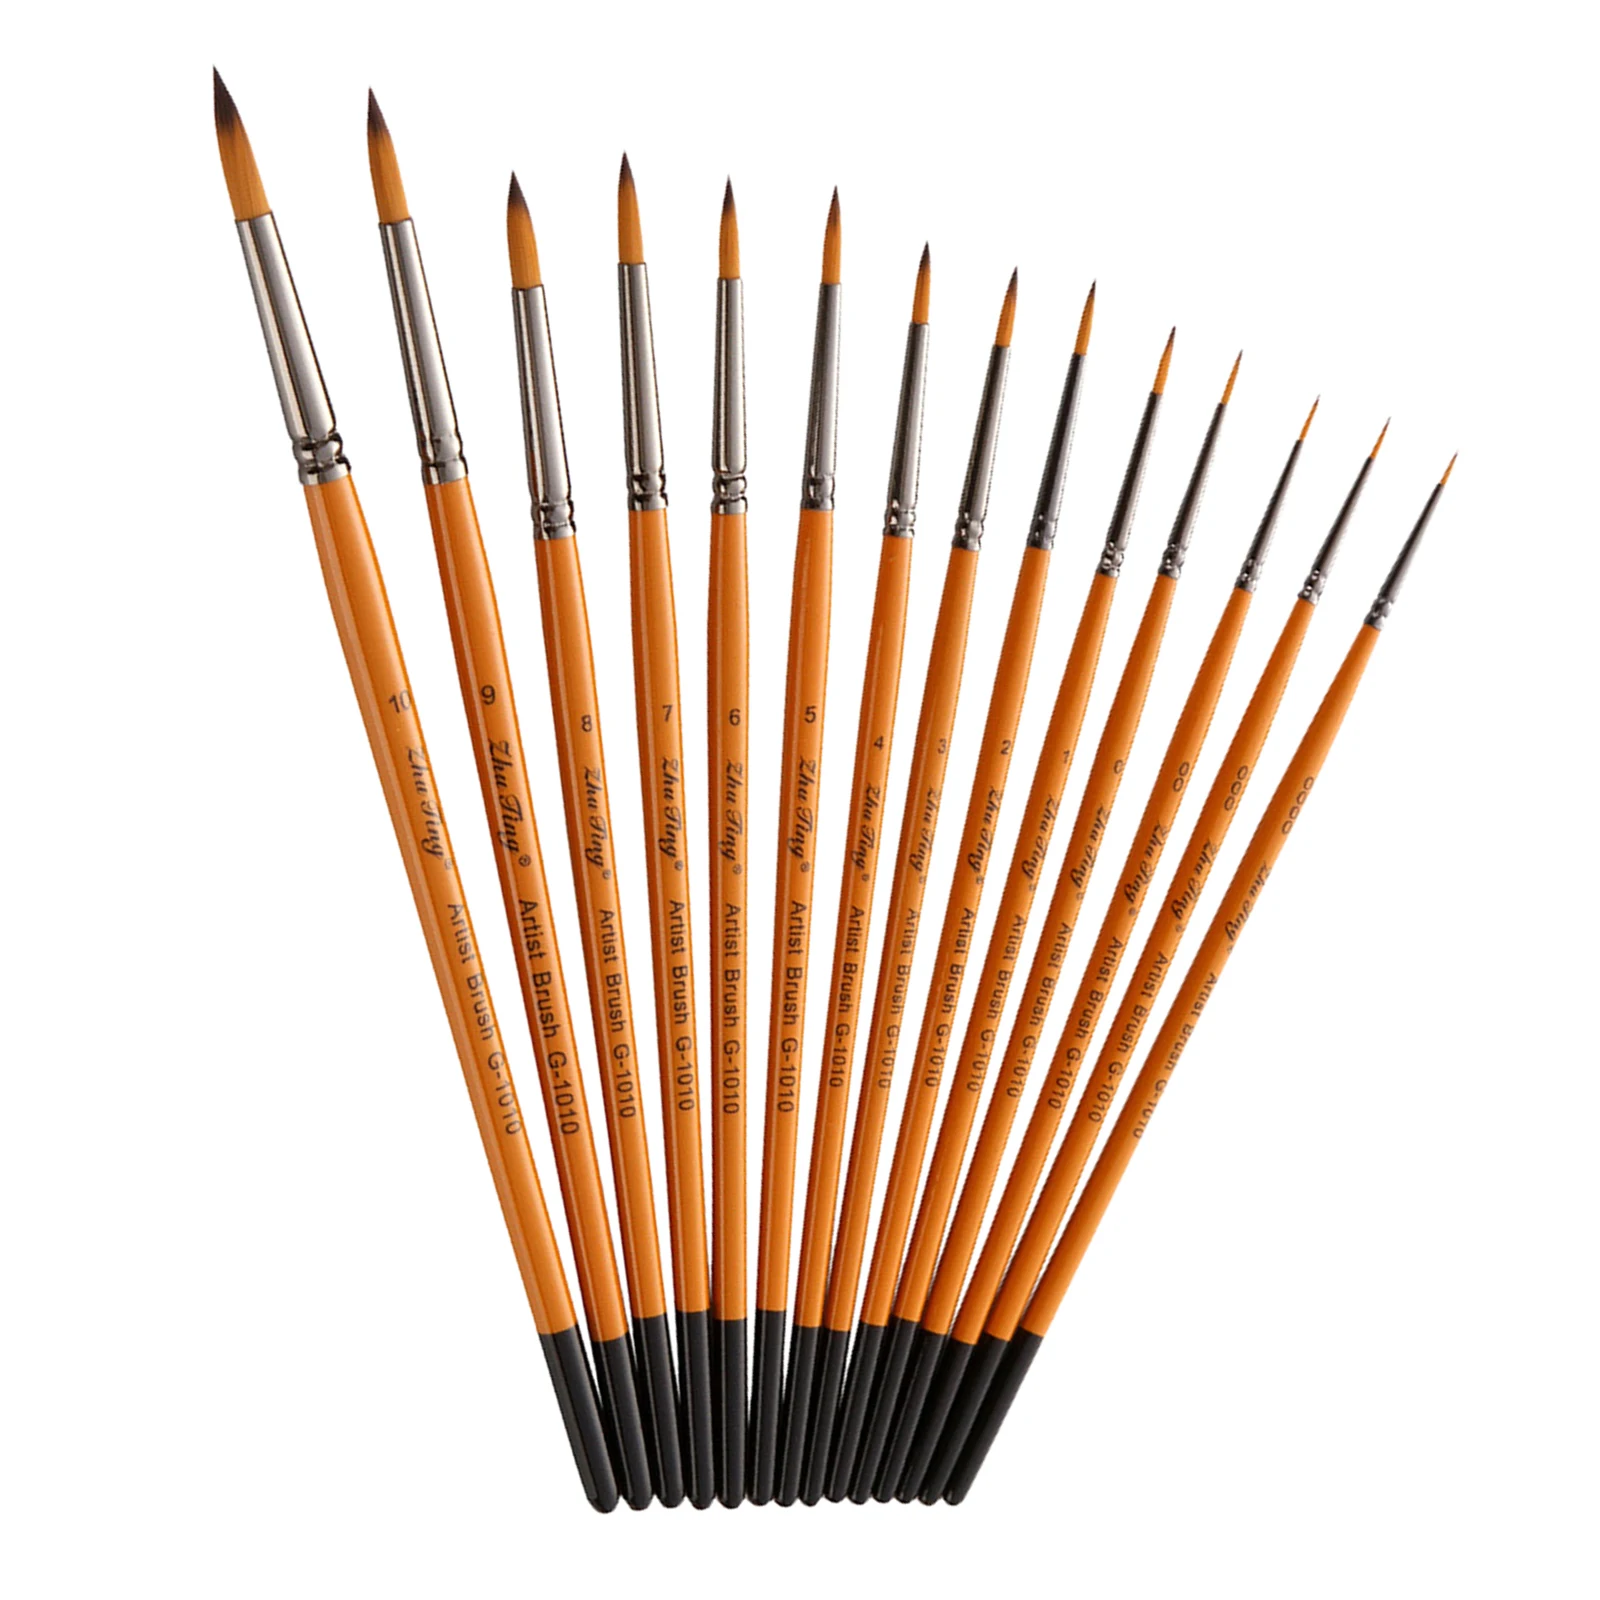 14Pcs/Set Wooden Handle Nylon Hair Artist Paint Brushes for Acrylic Watercolor Oil Painting Supplies Art Craft Kit